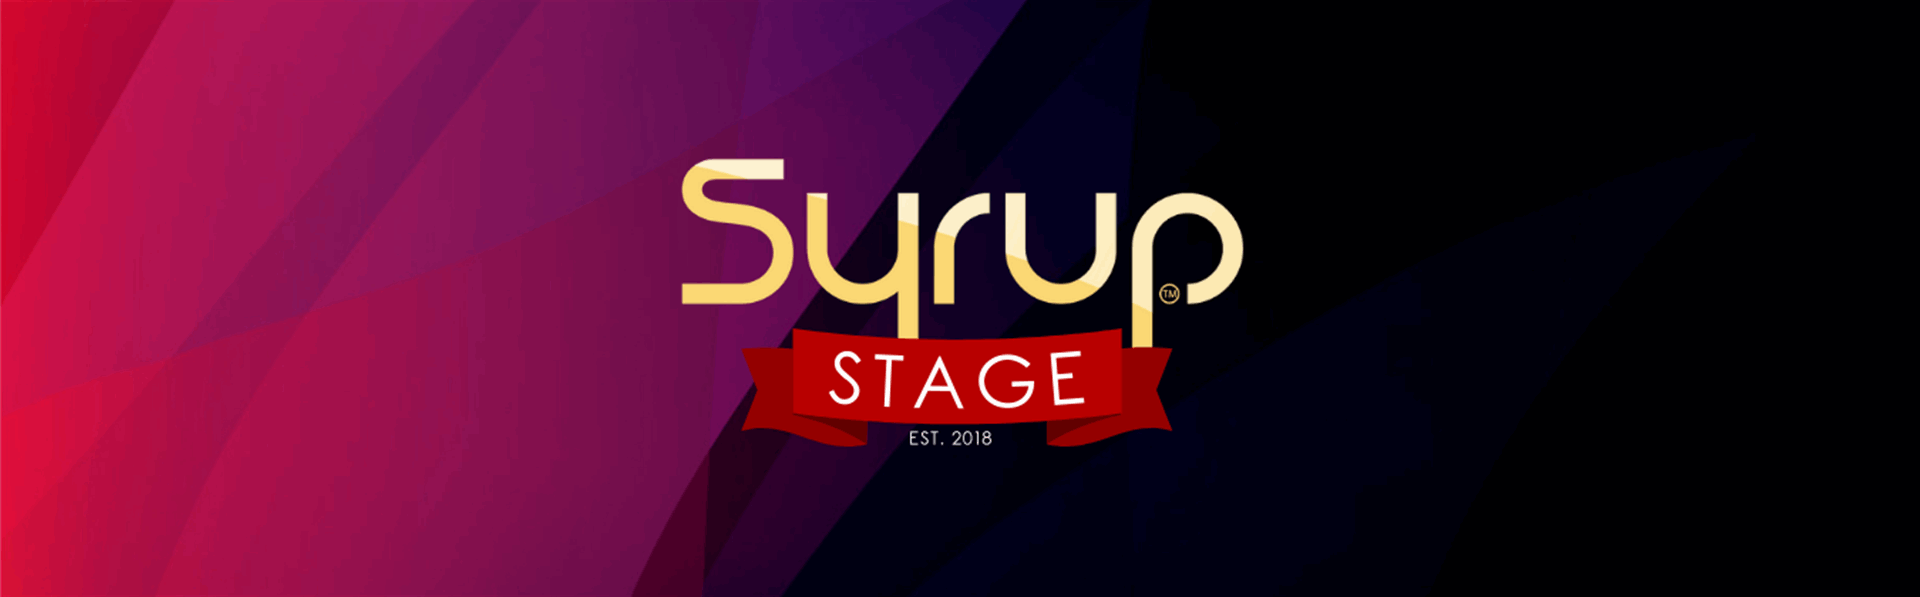 Syrup Stage